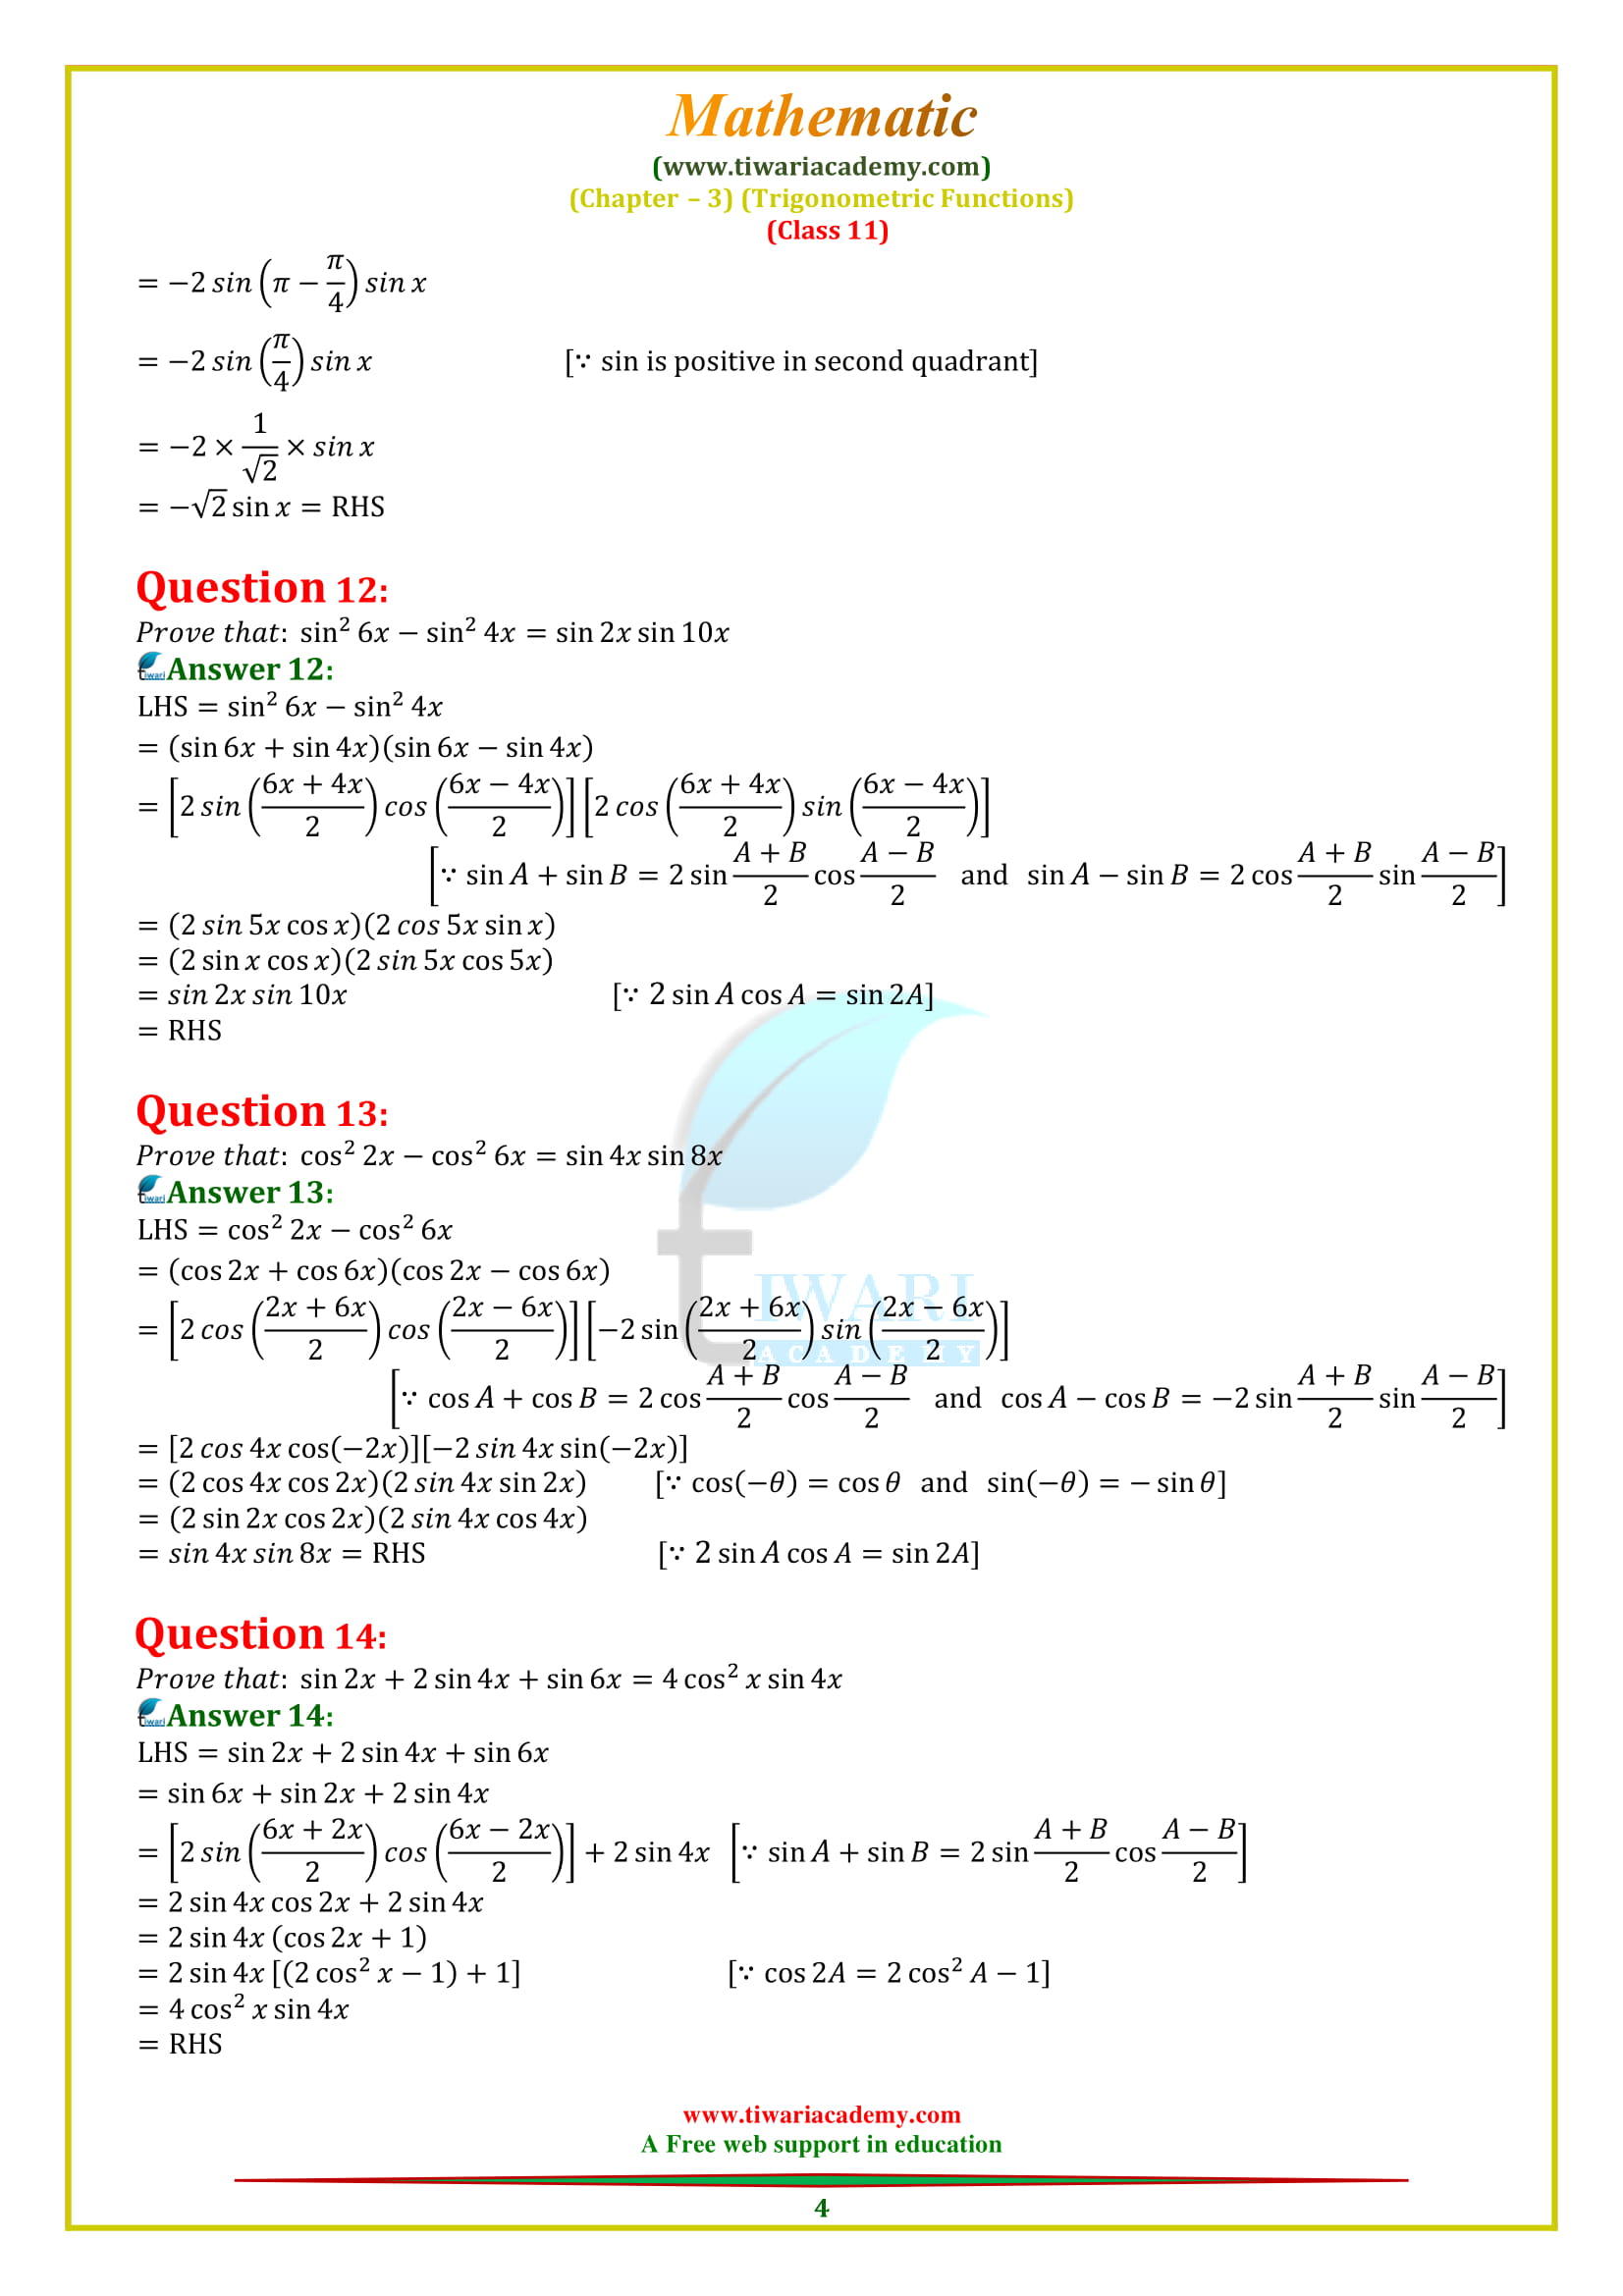 11 Maths Chapter 3 Exercise 3.3 solutions questions 1, 2, 3, 4, 5, 6, 7.